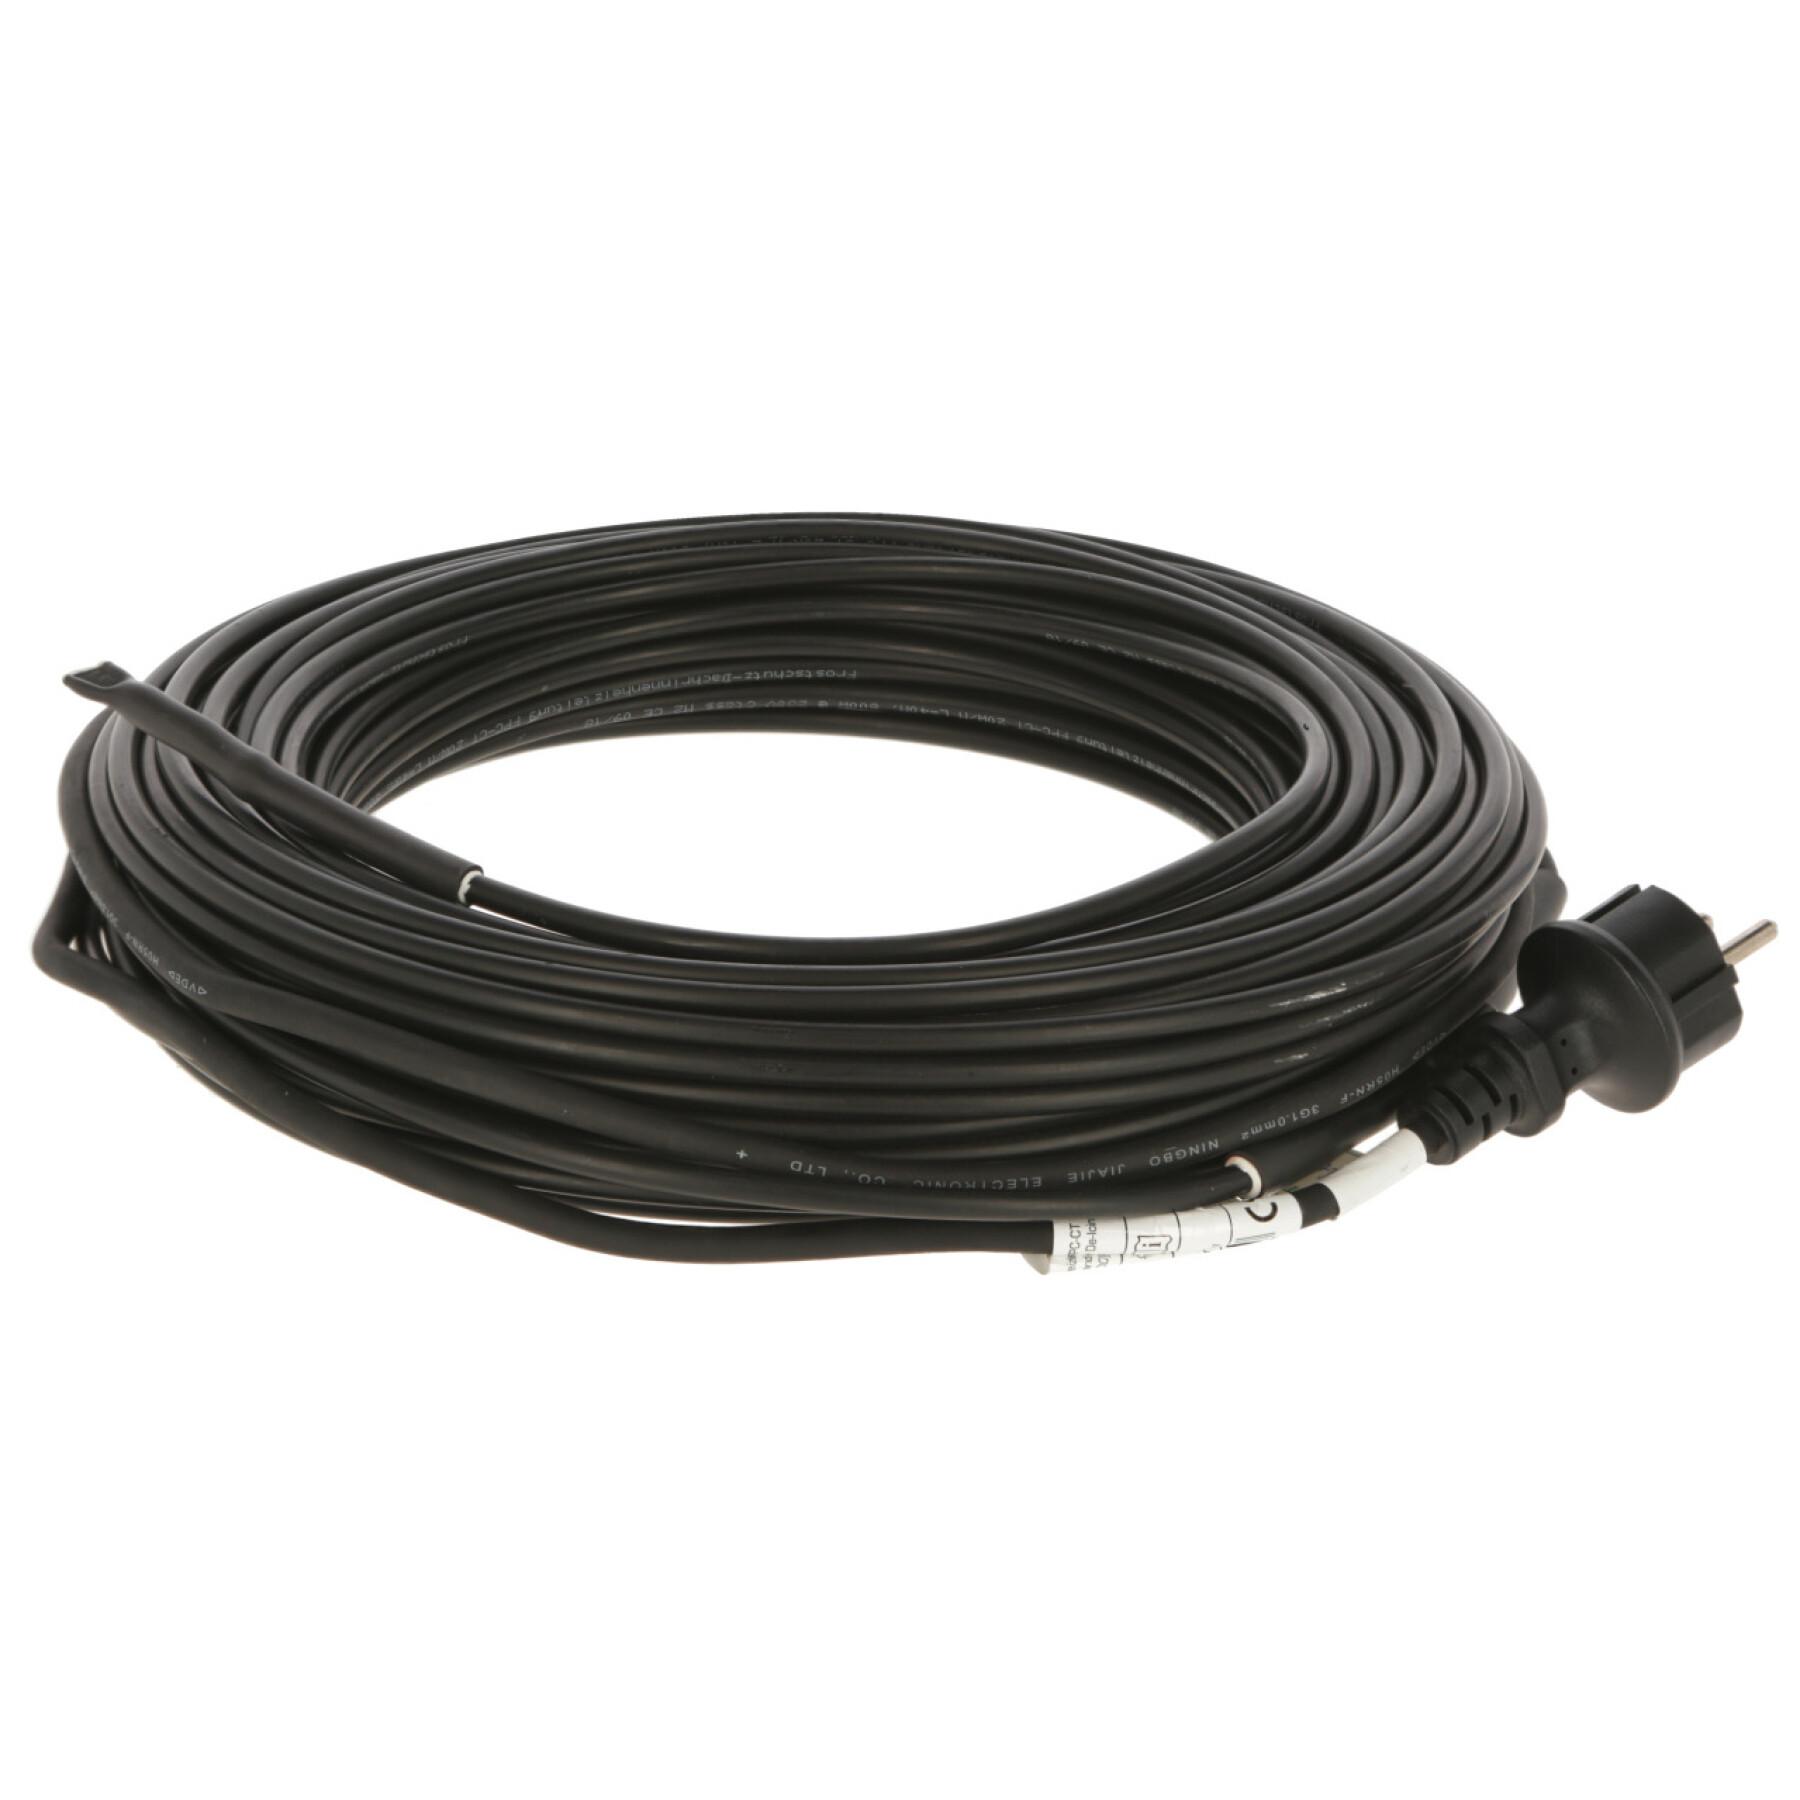 Gutter heating cable Kerbl